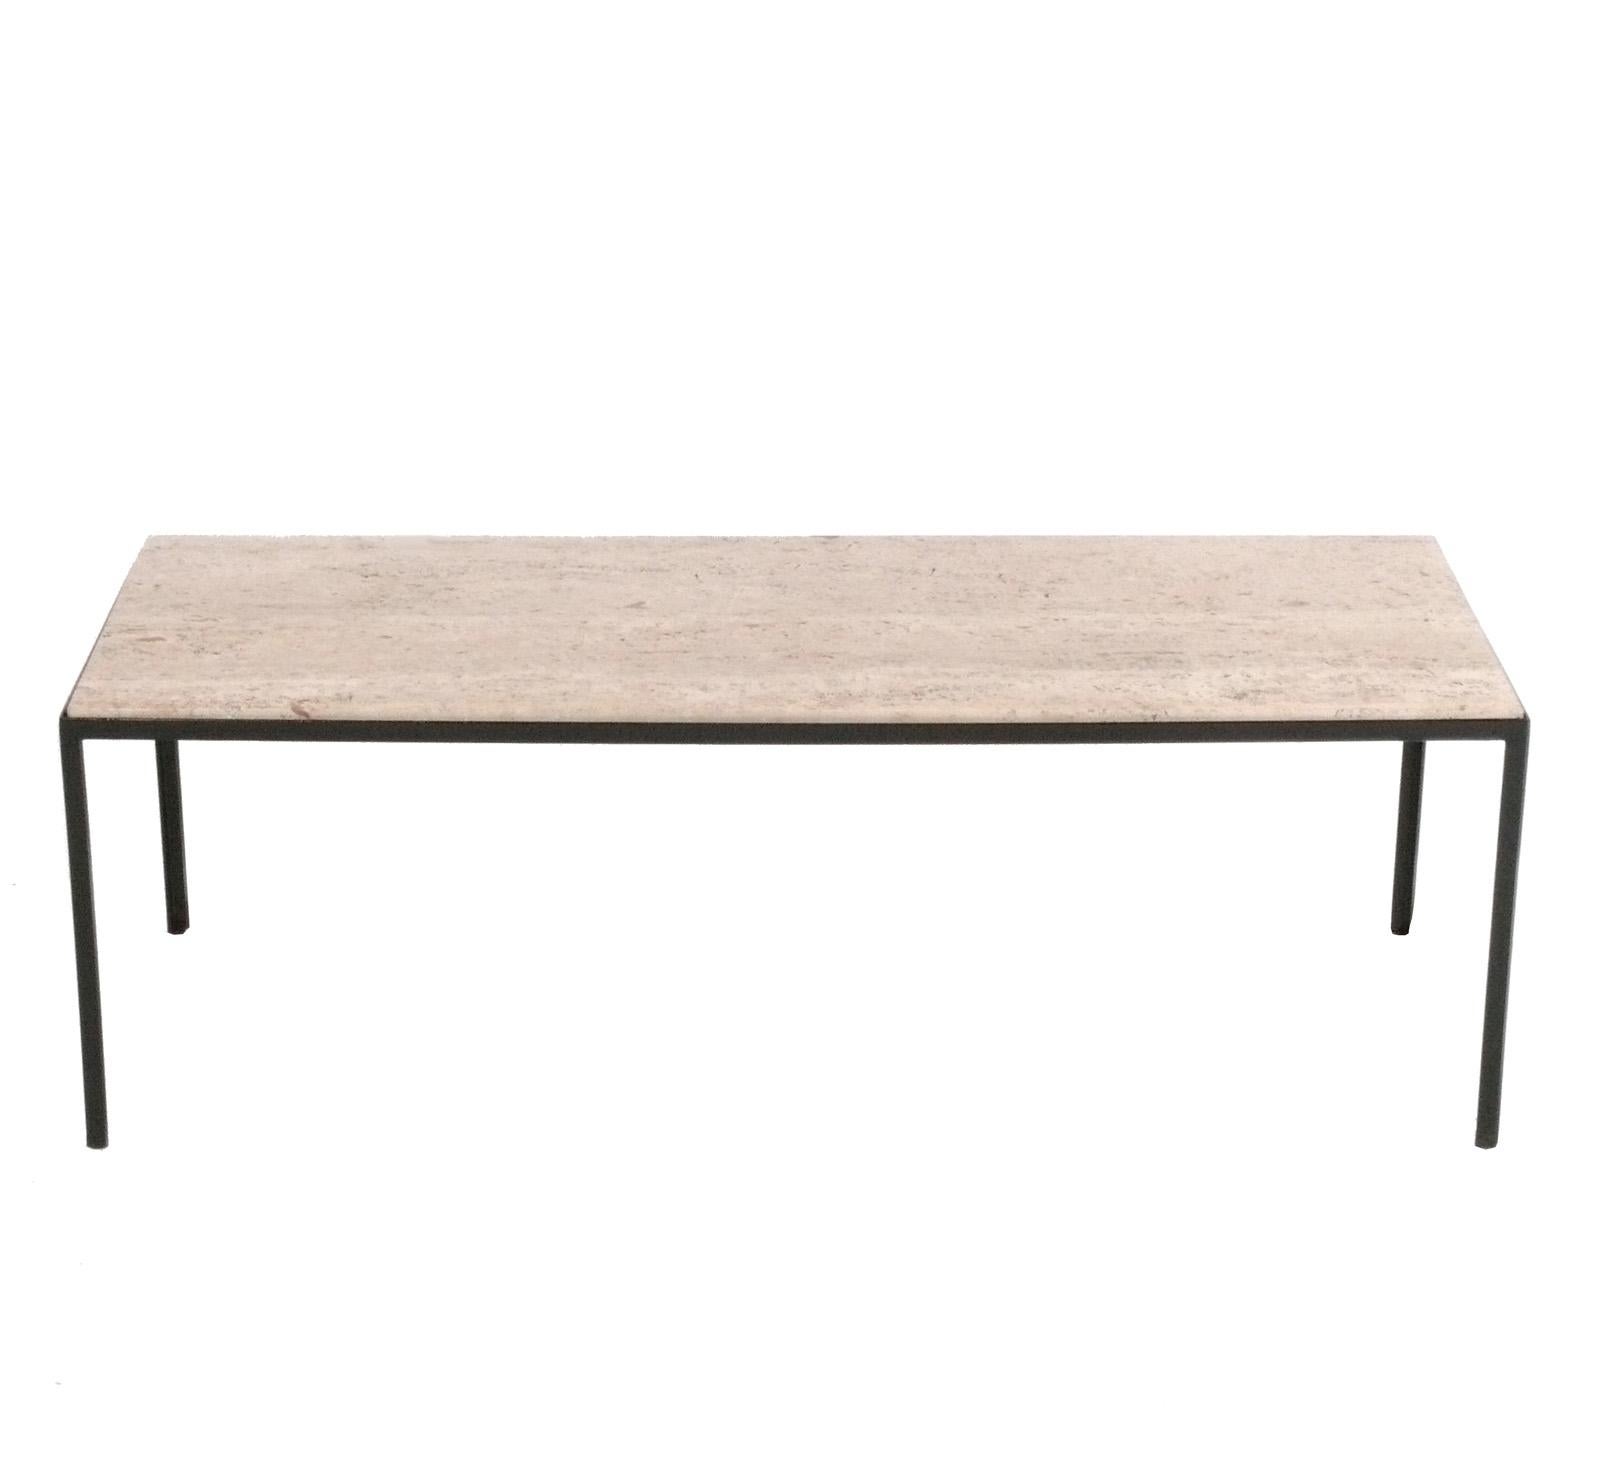 Mid-Century Modern Travertine and Iron Coffee Table attributed to Florence Knoll For Sale